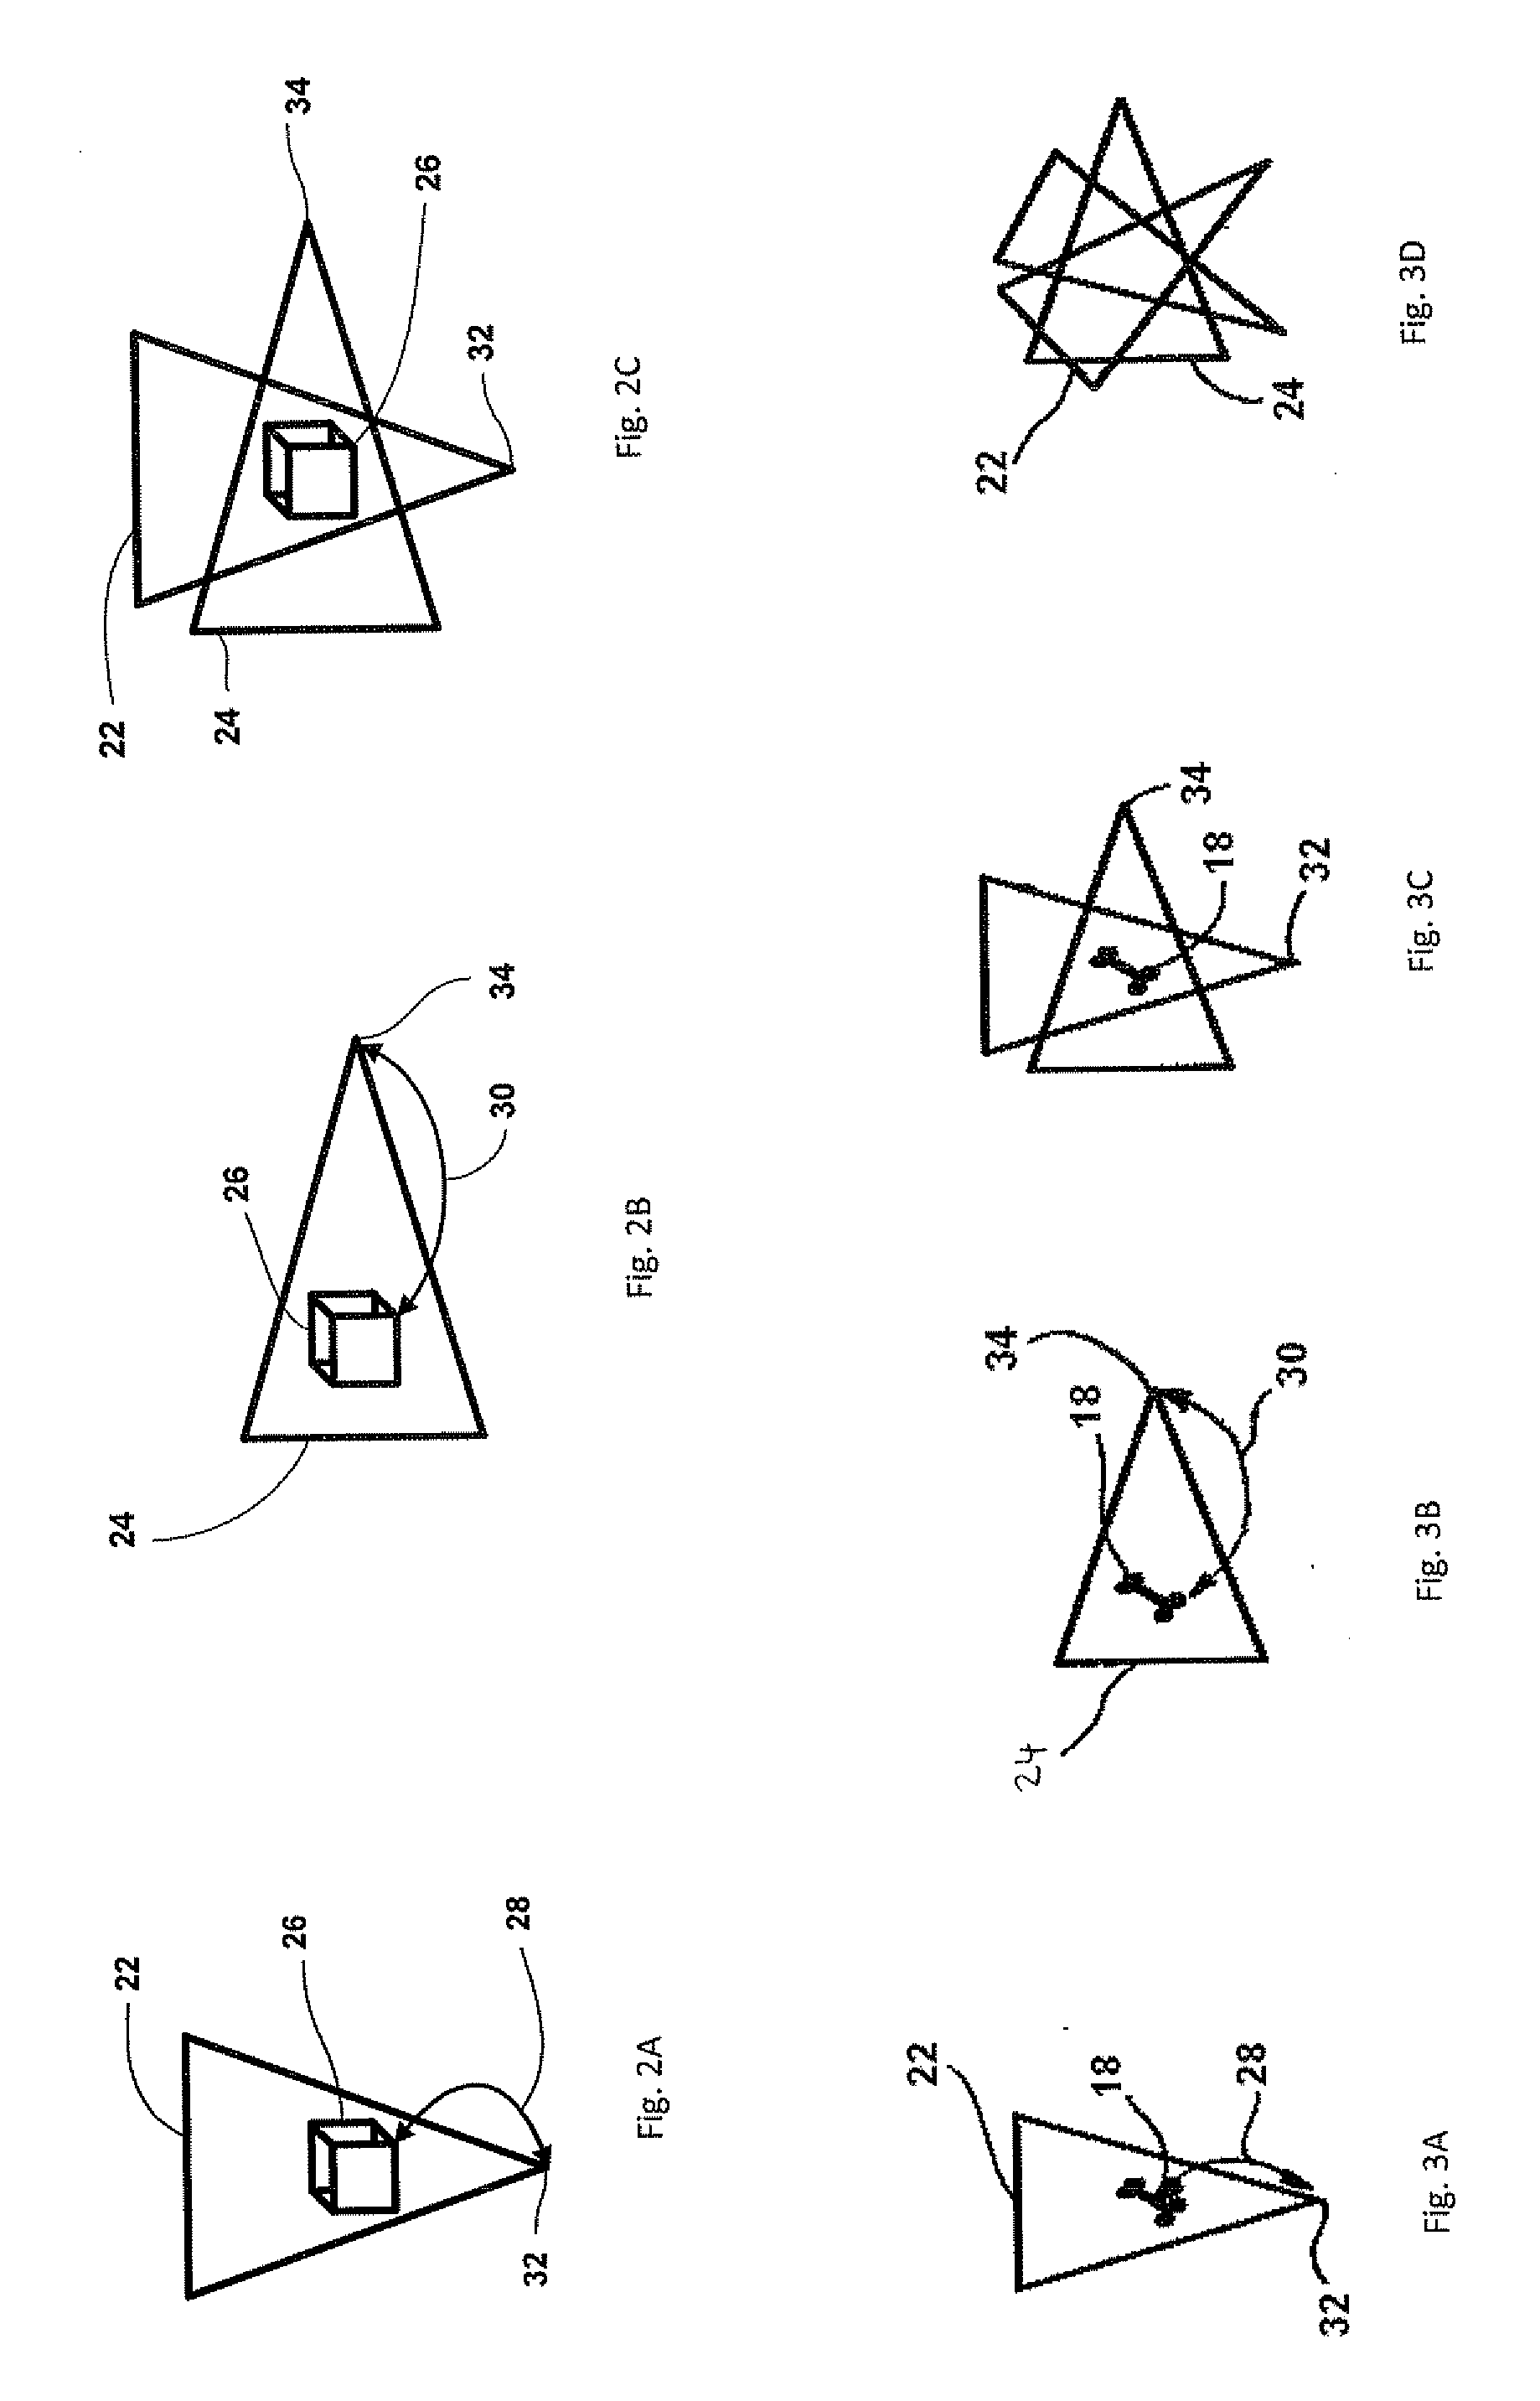 Method and system for determining an imaging direction and calibration of an imaging apparatus